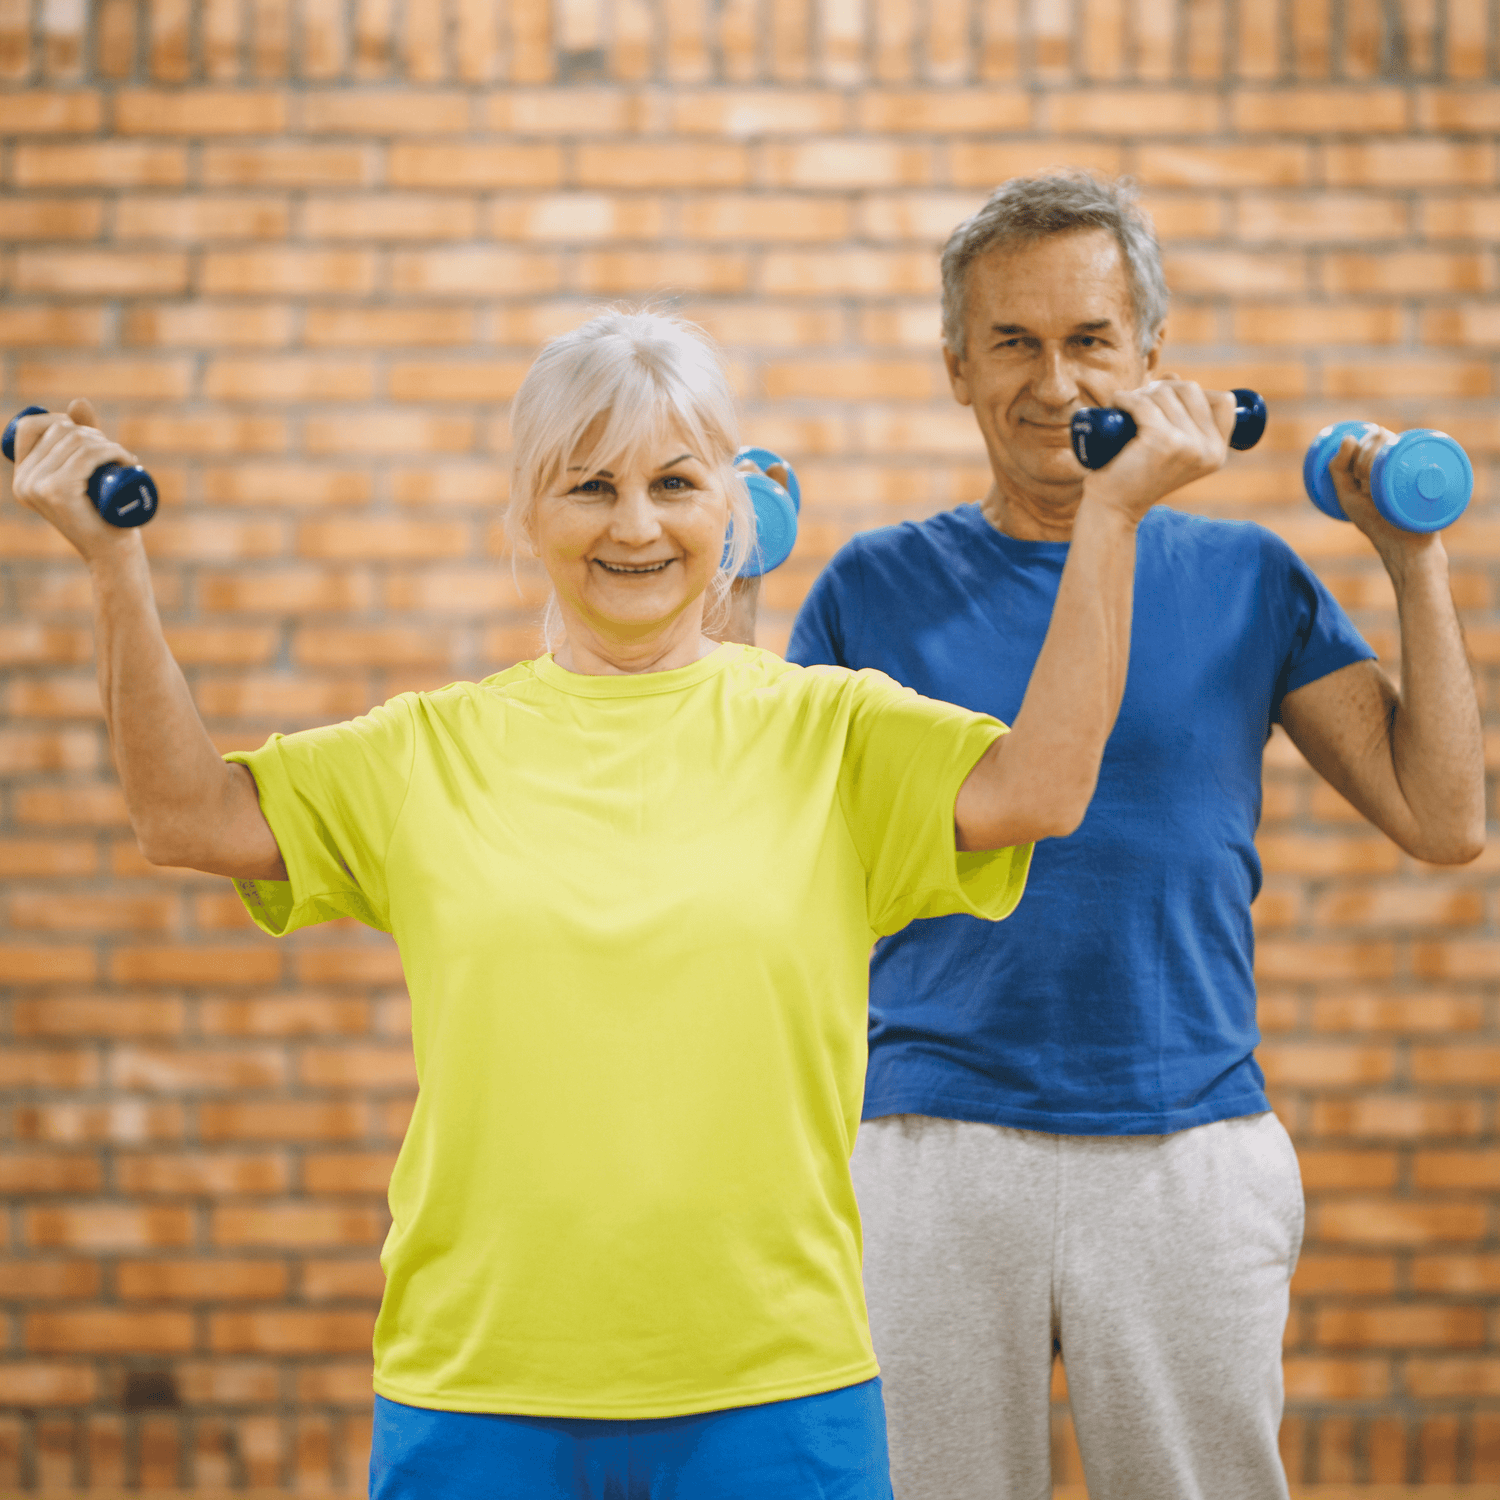 At What Age Should You Stop Lifting Weights: Things to Consider